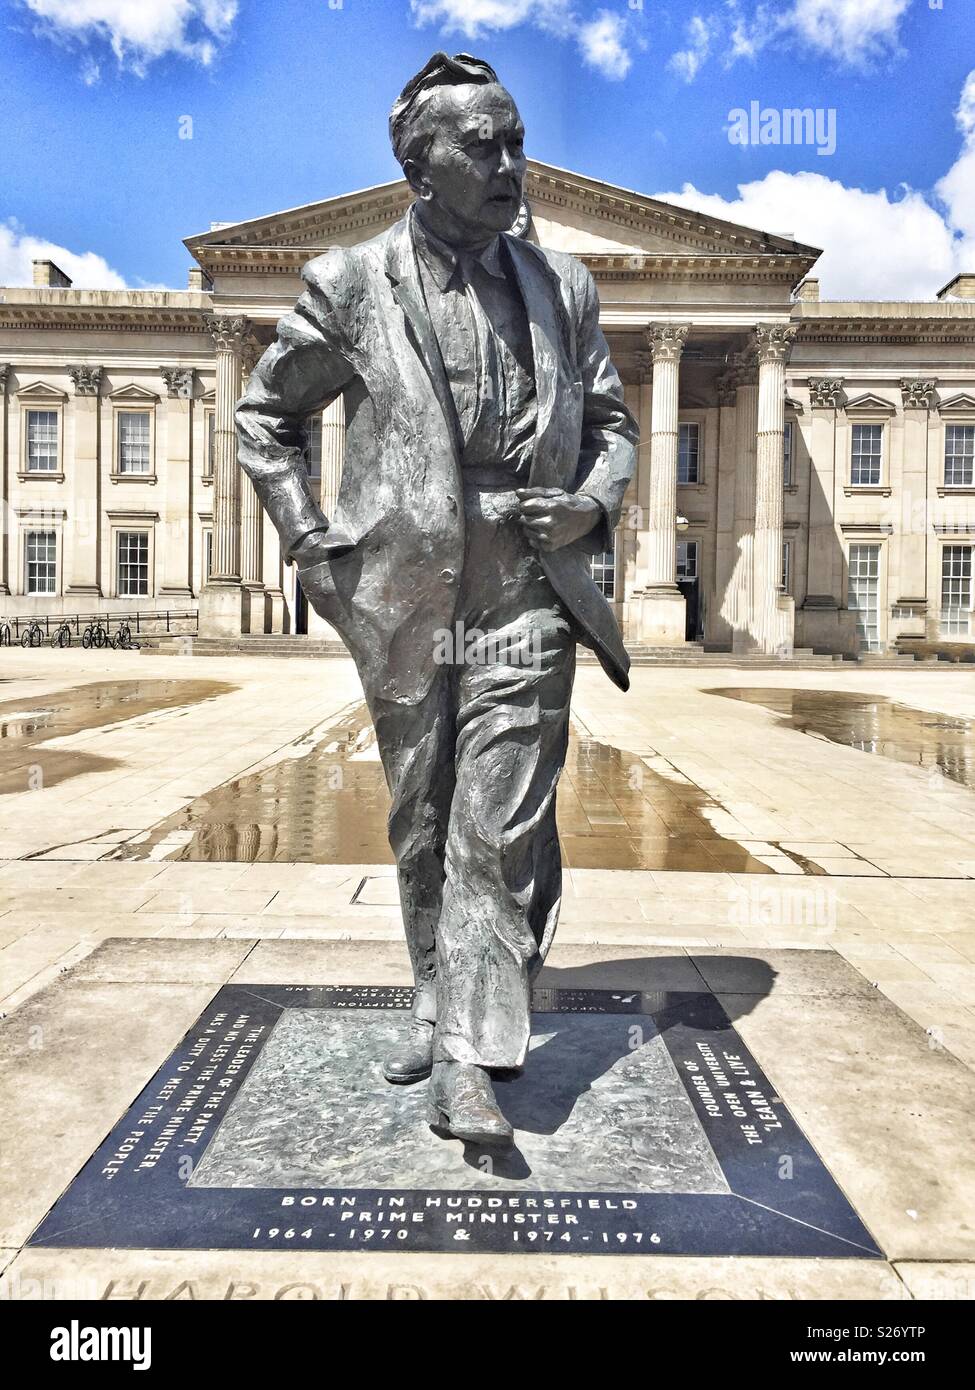 Statue outside Huddersfield Railway Station of Harold Wilson, who was born in Huddersfield and was United Kingdom’s Labour Prime Minister 1964 to 1970 and 1974 to 1976. Stock Photo